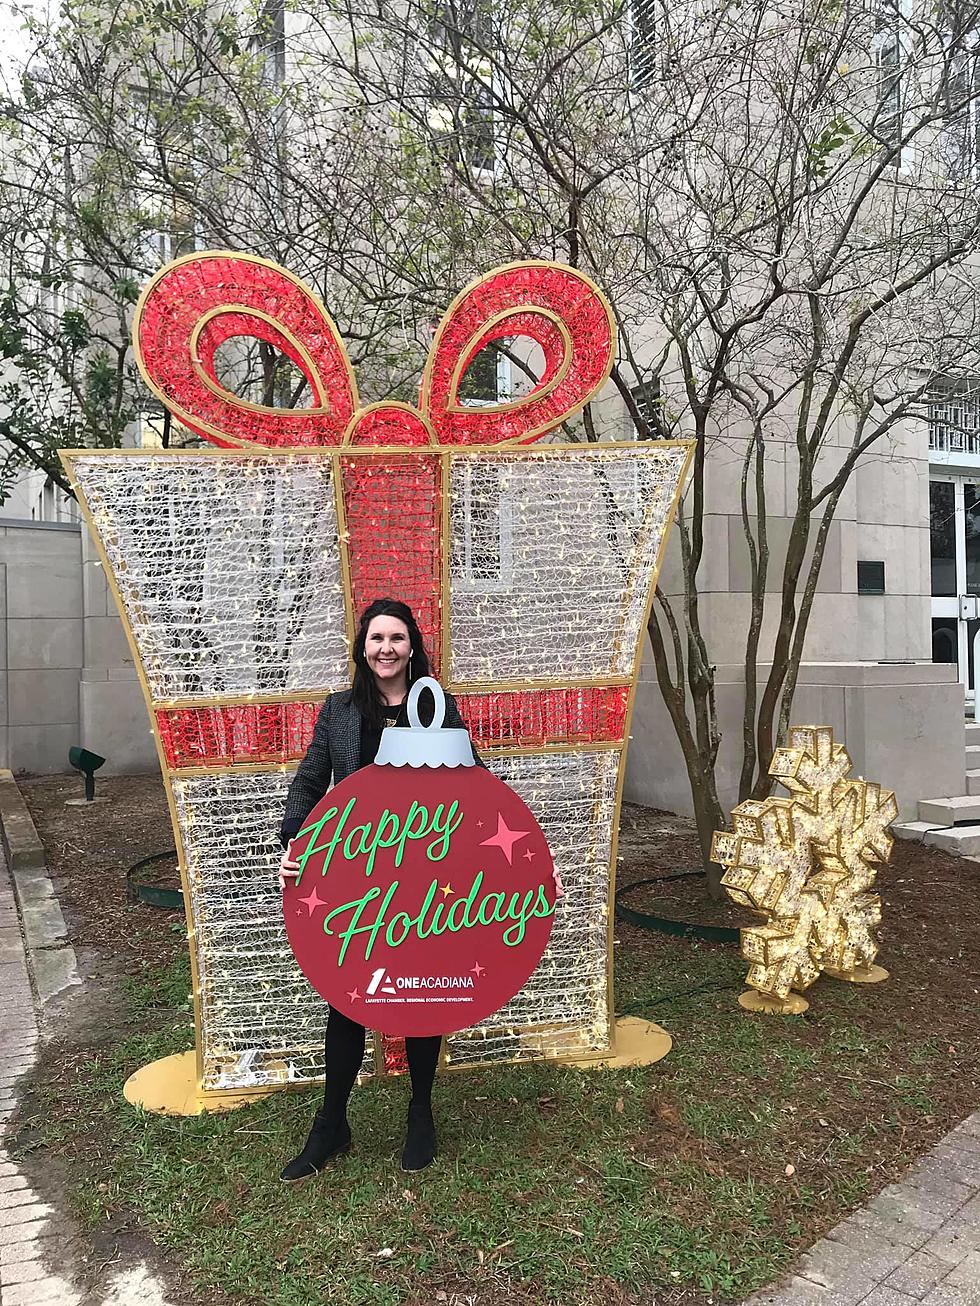 Who’s Bringing “Merry & Bright” for Christmas? Downtown Lafayette